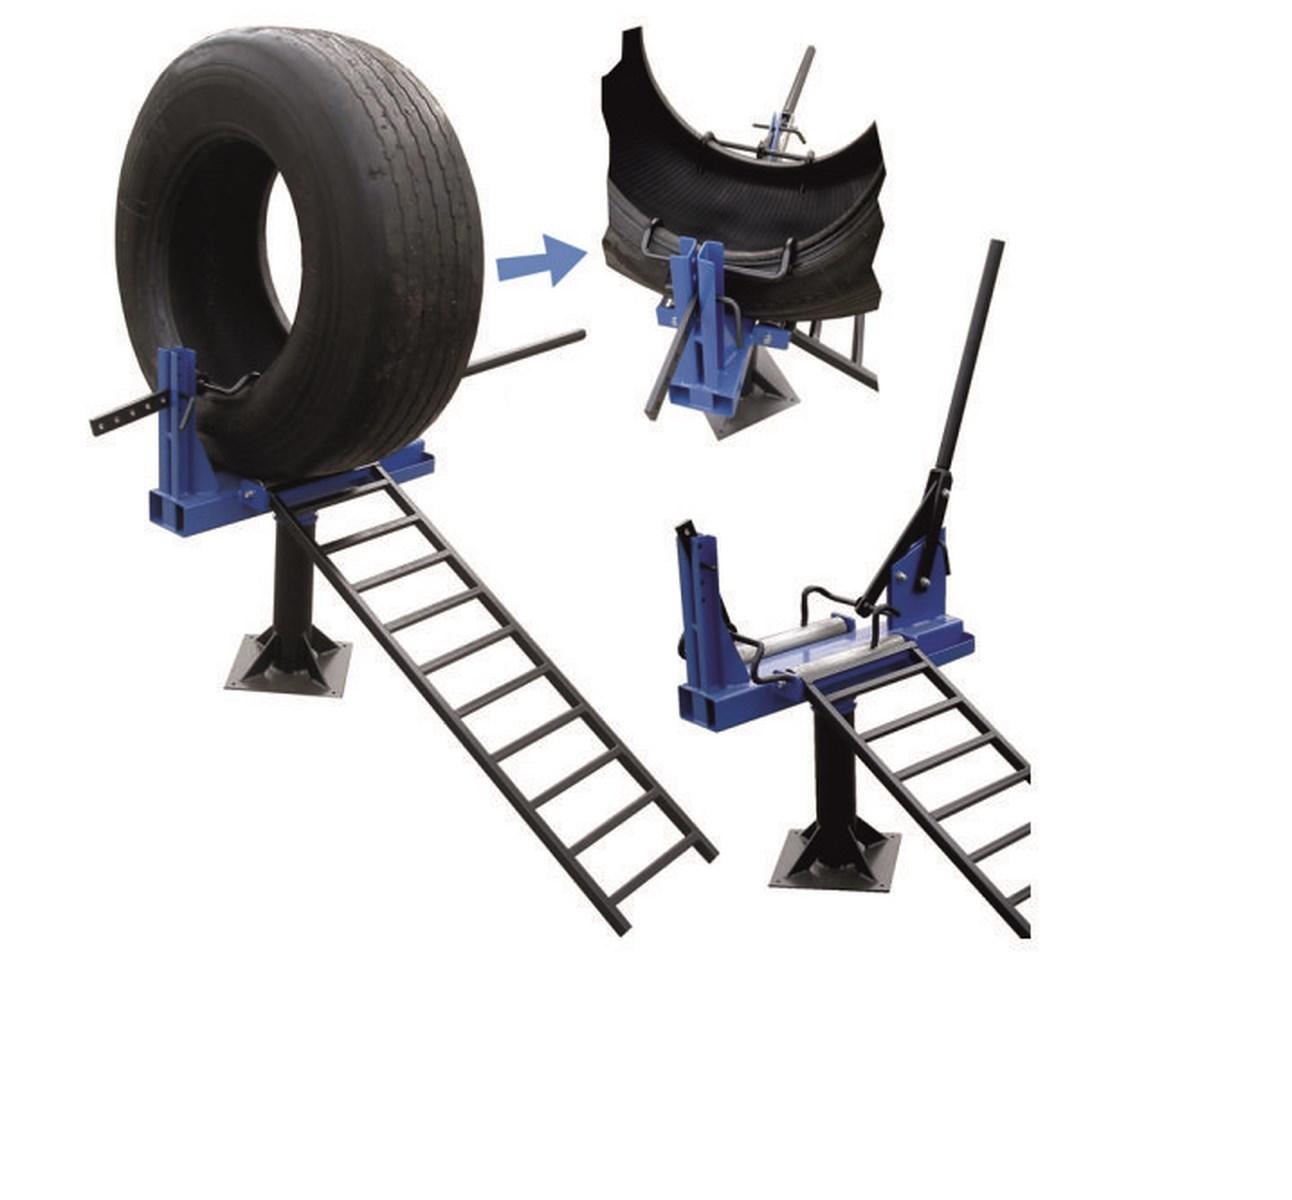 Truck tyre expander